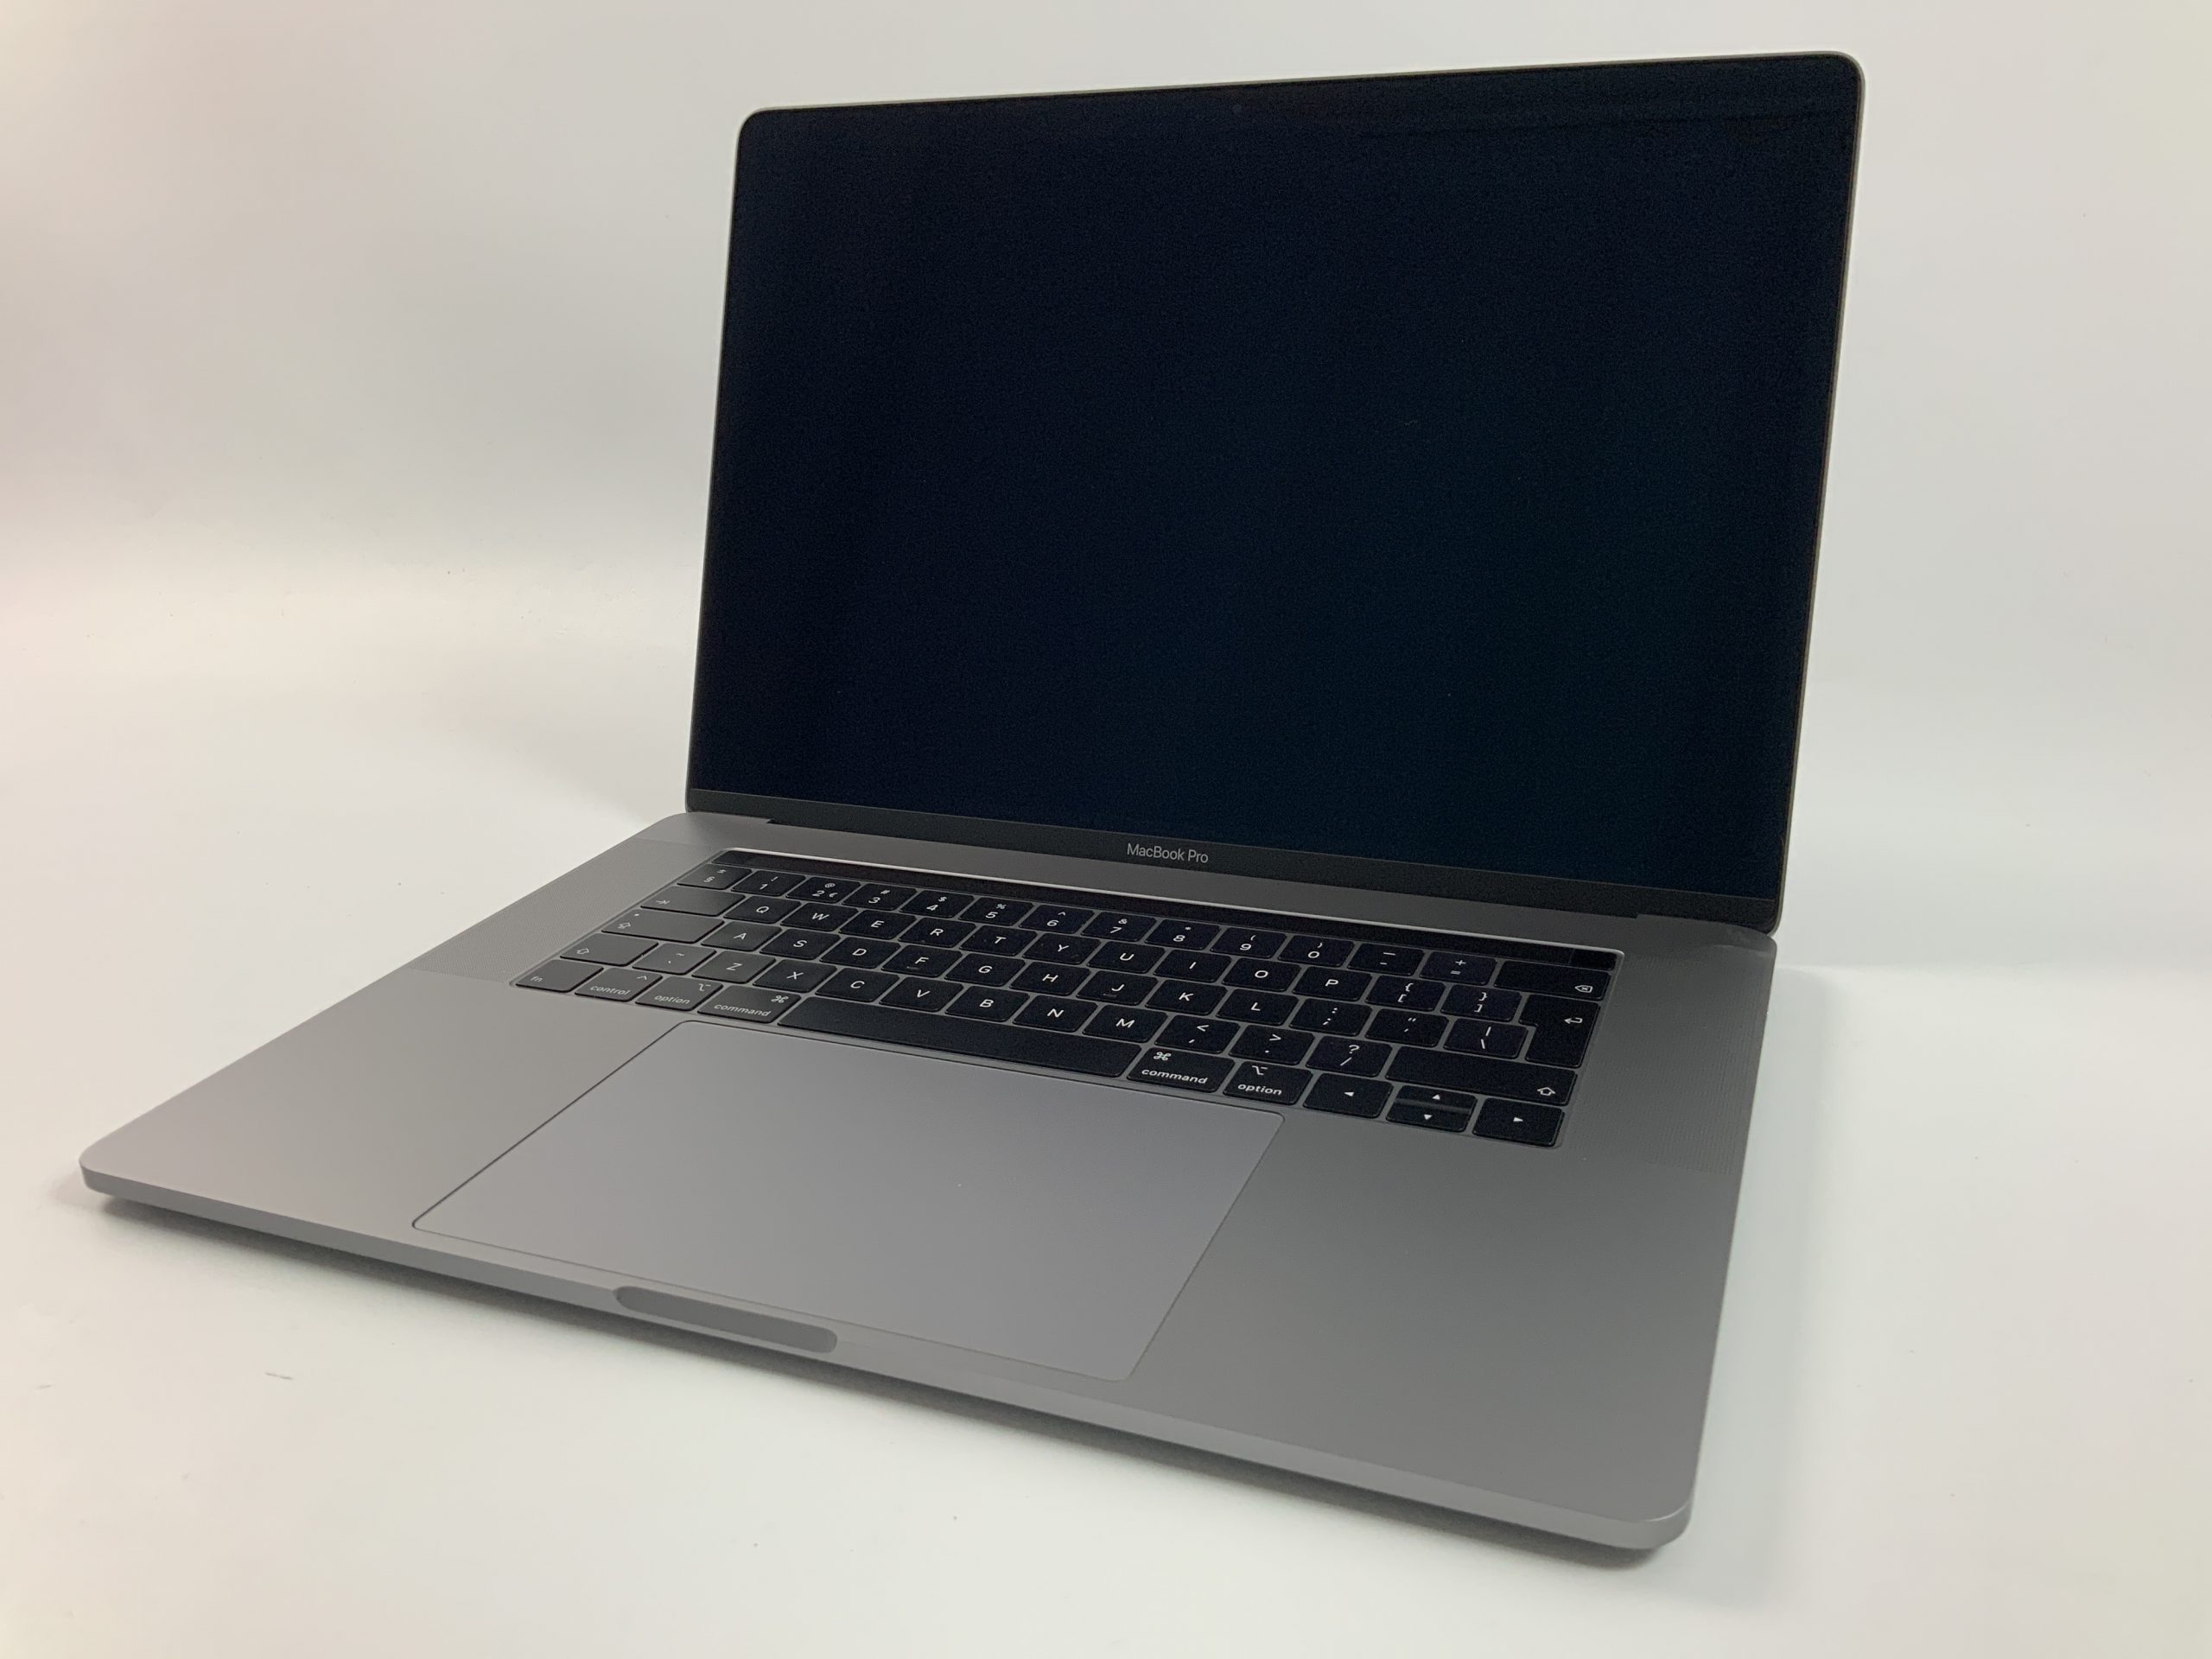 MacBook Pro 15" Touch Bar Mid 2018 (Intel 6-Core i7 2.2 GHz 16 GB RAM 512 GB SSD), Space Gray, Intel 6-Core i7 2.2 GHz, 16 GB RAM, 512 GB SSD, Afbeelding 1